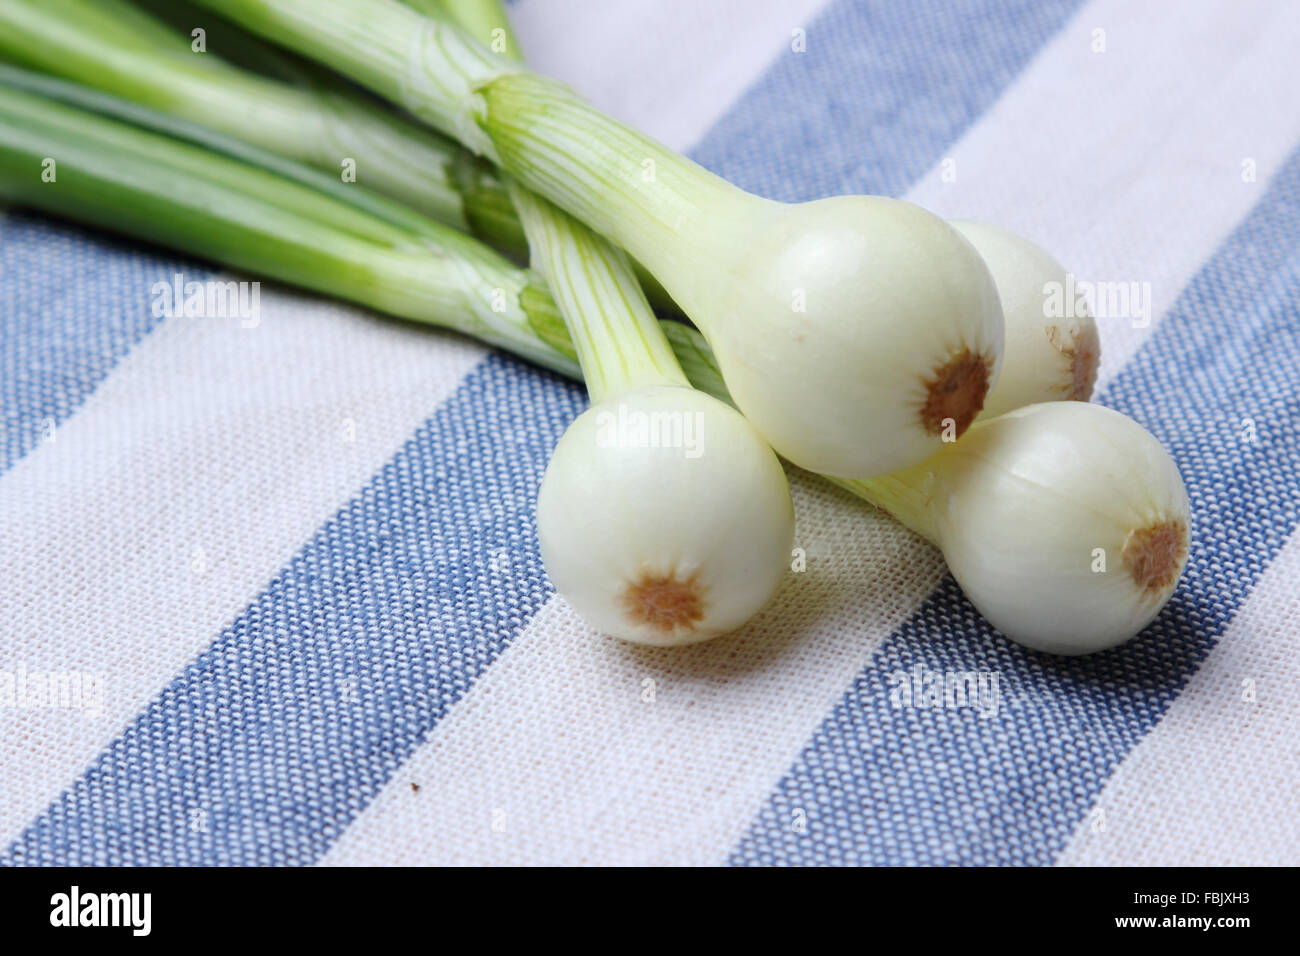 Young green onions on the tablecloth Stock Photo